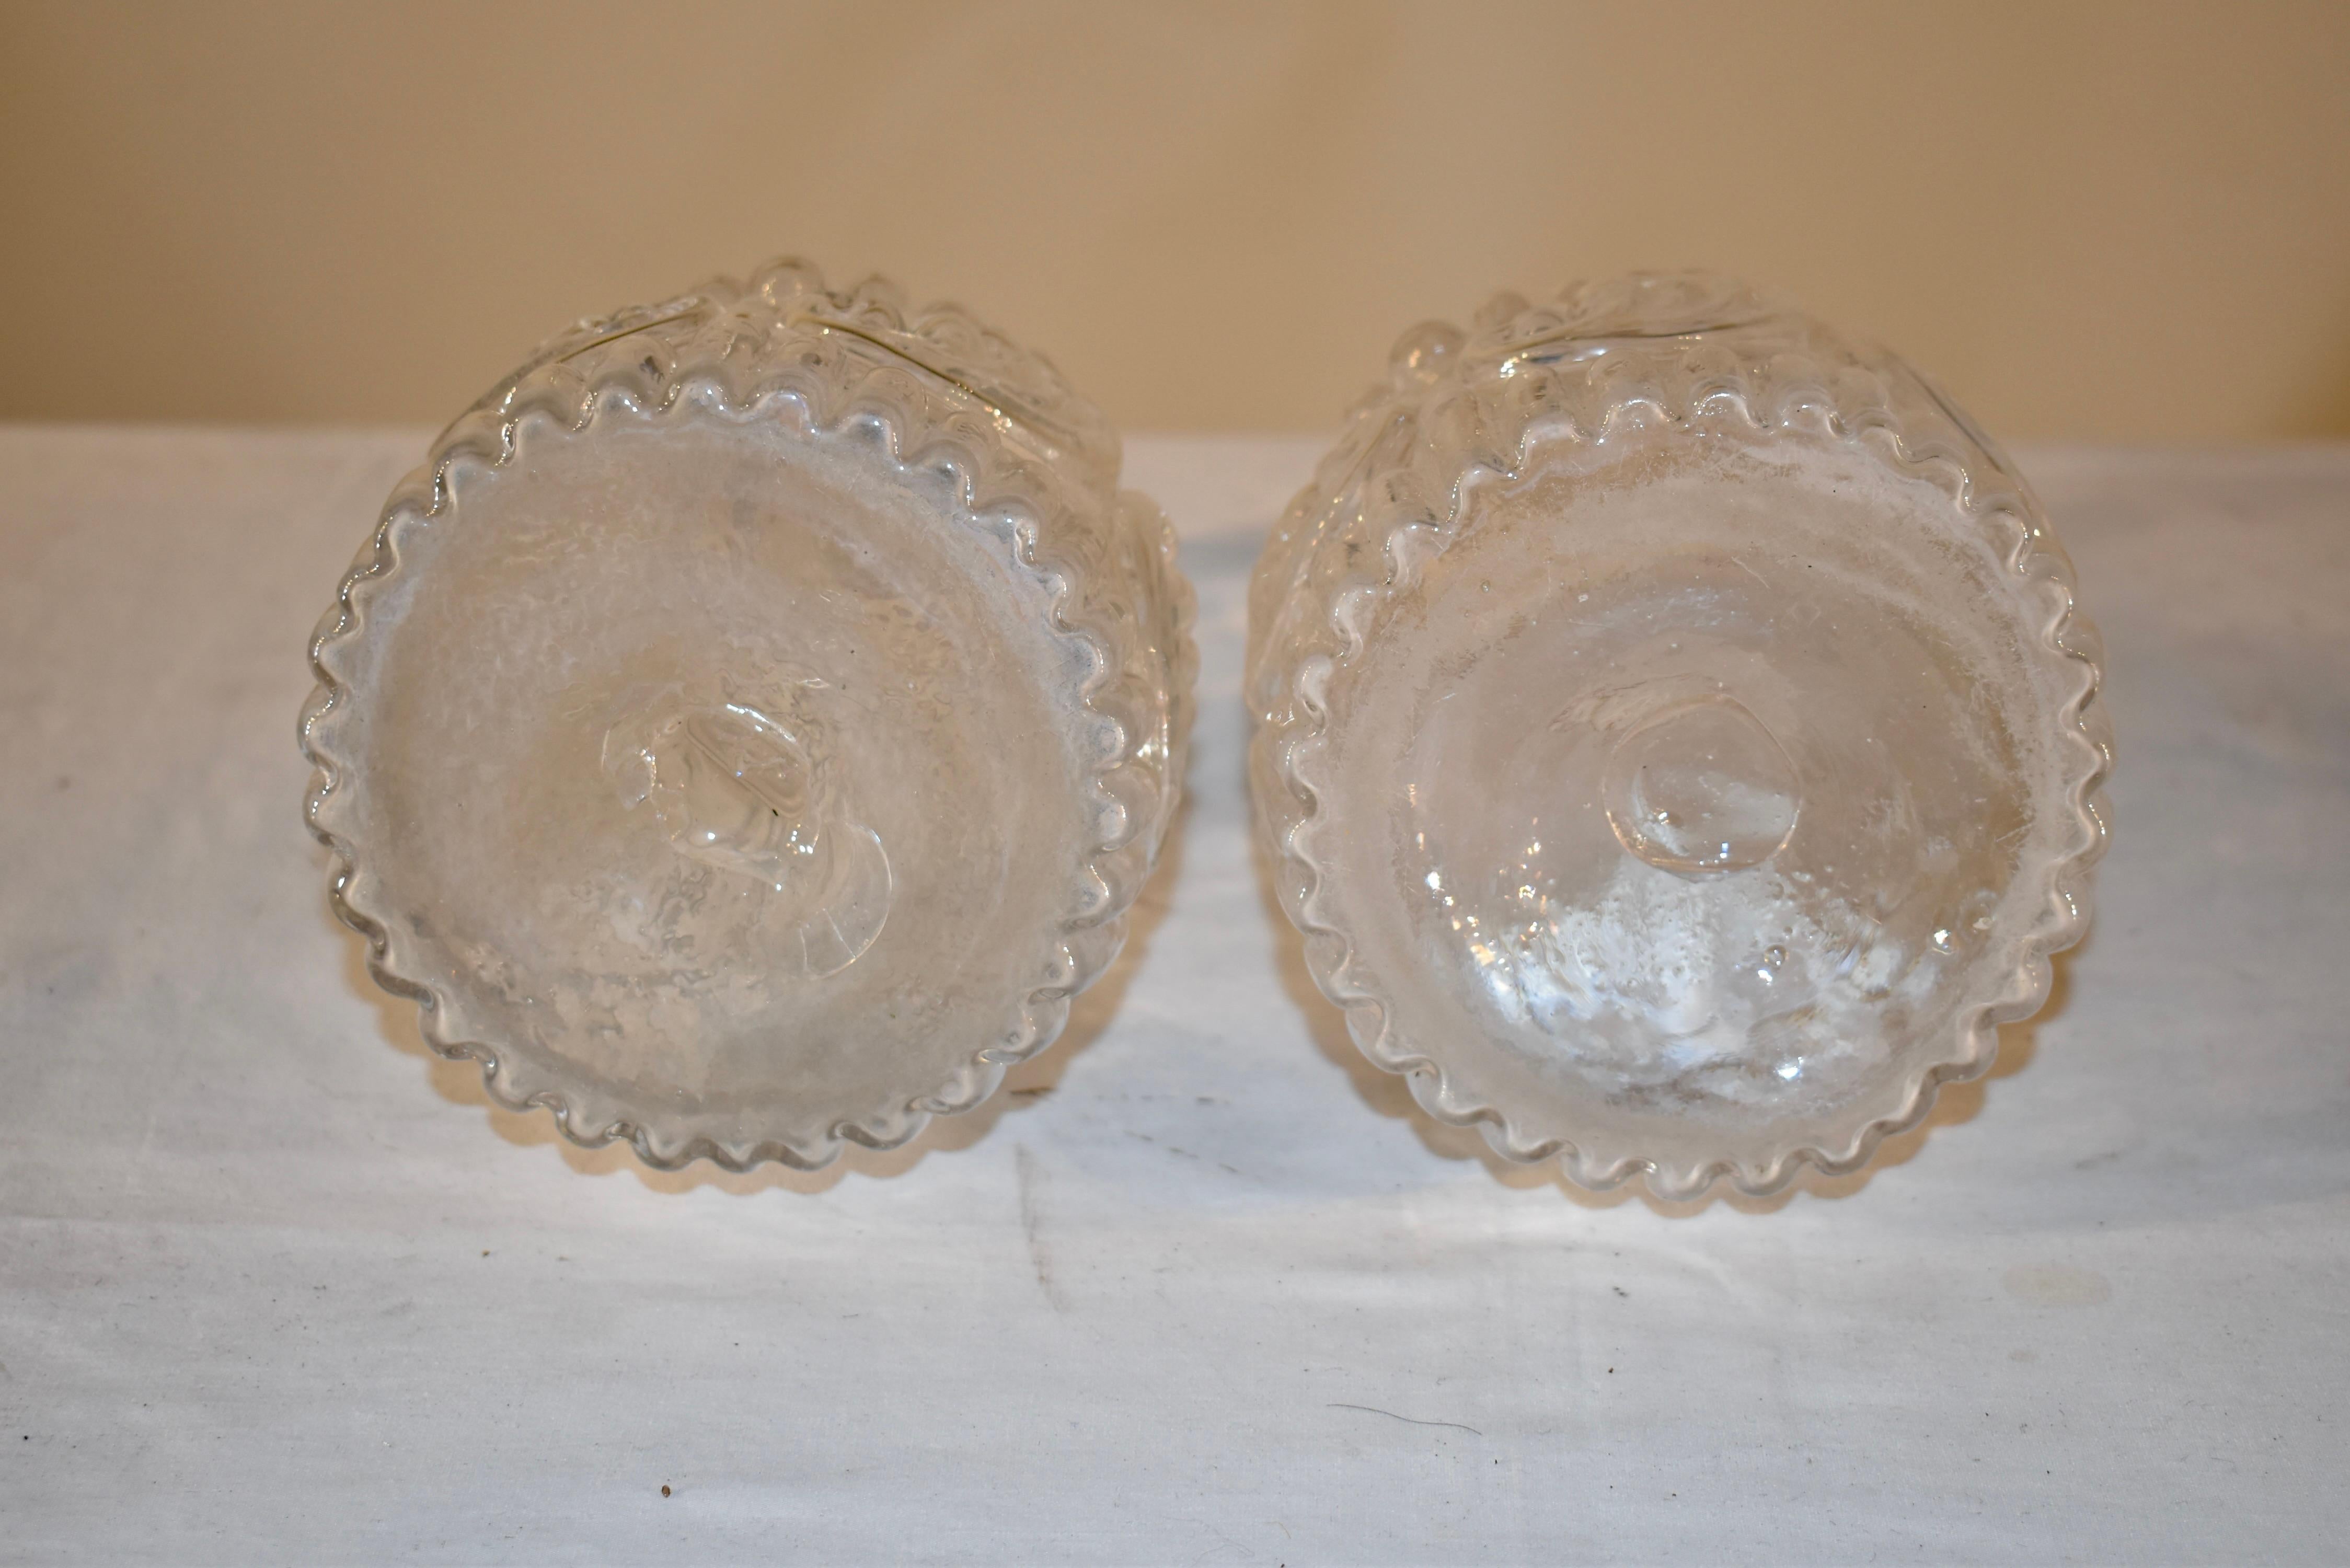 Pair of Early 19th Century American Mold Blown Decanters For Sale 6